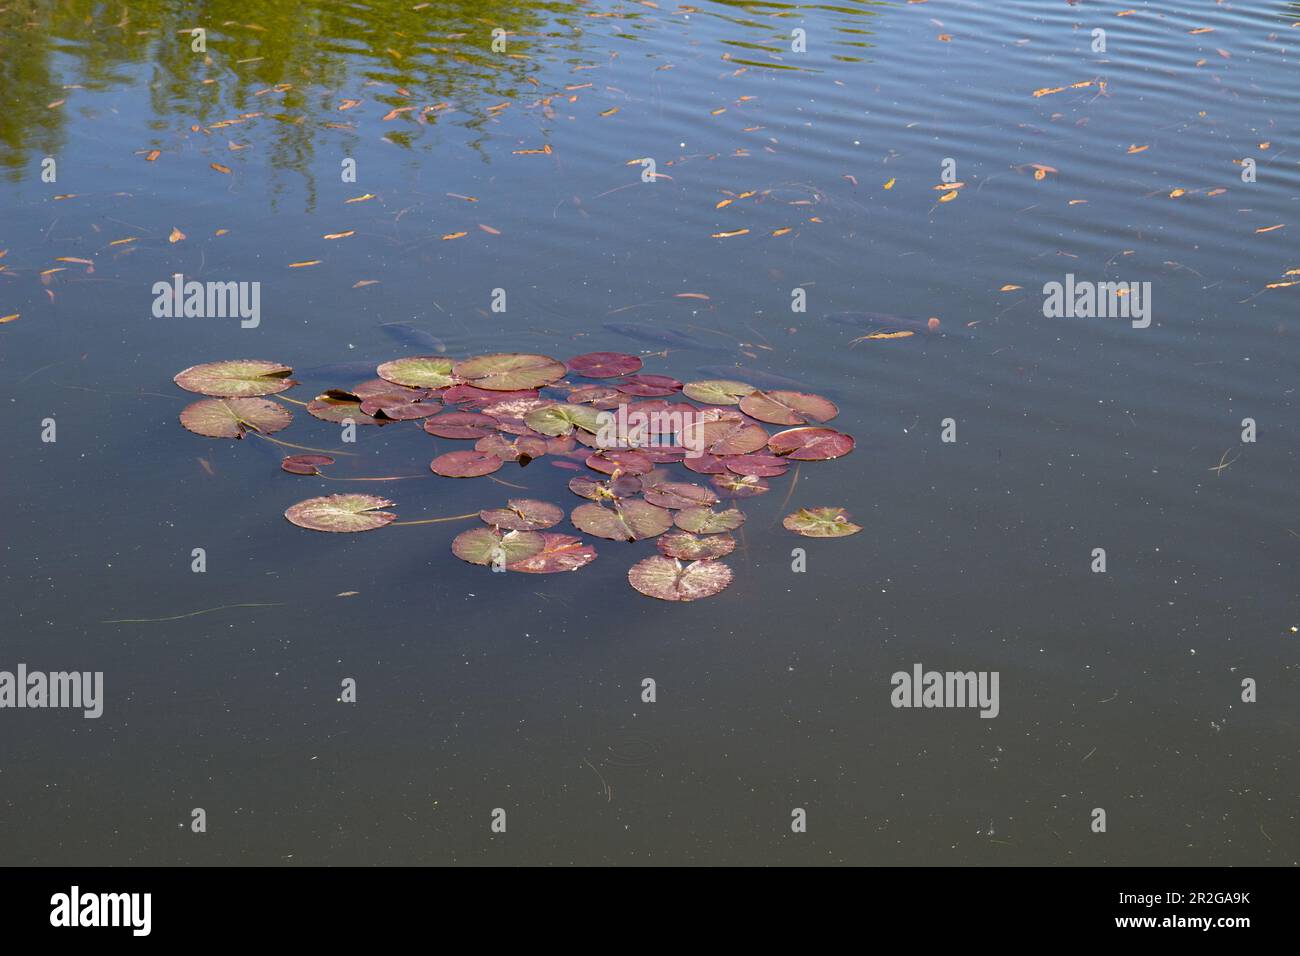 Fish swim close to the surface of the water. Fish pond in the park. Stock Photo